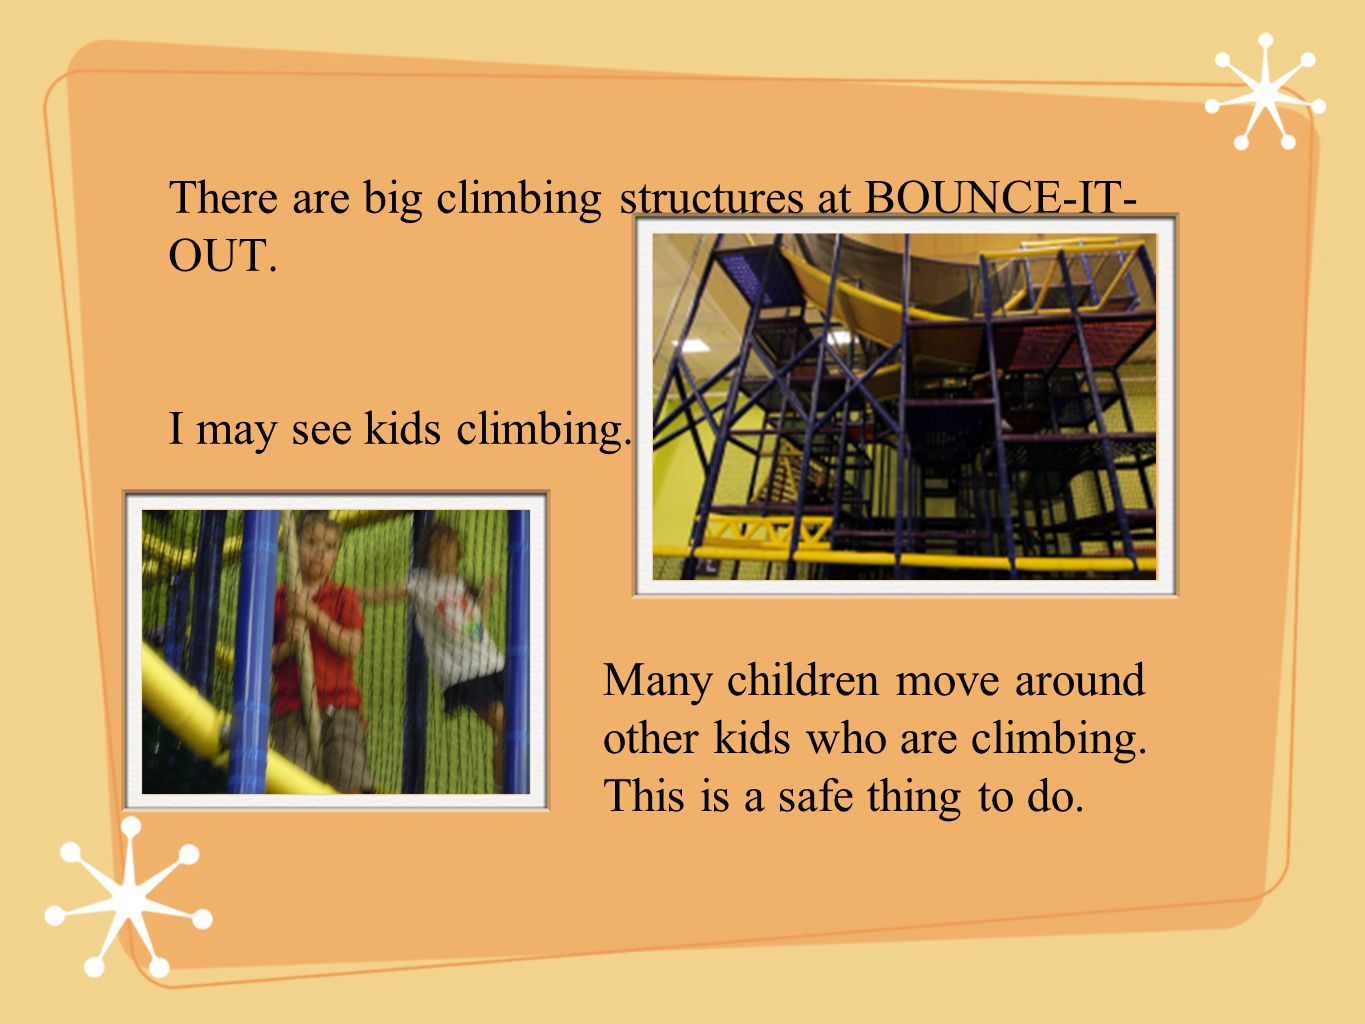 There are big climbing structures at BOUNCE-IT- OUT.